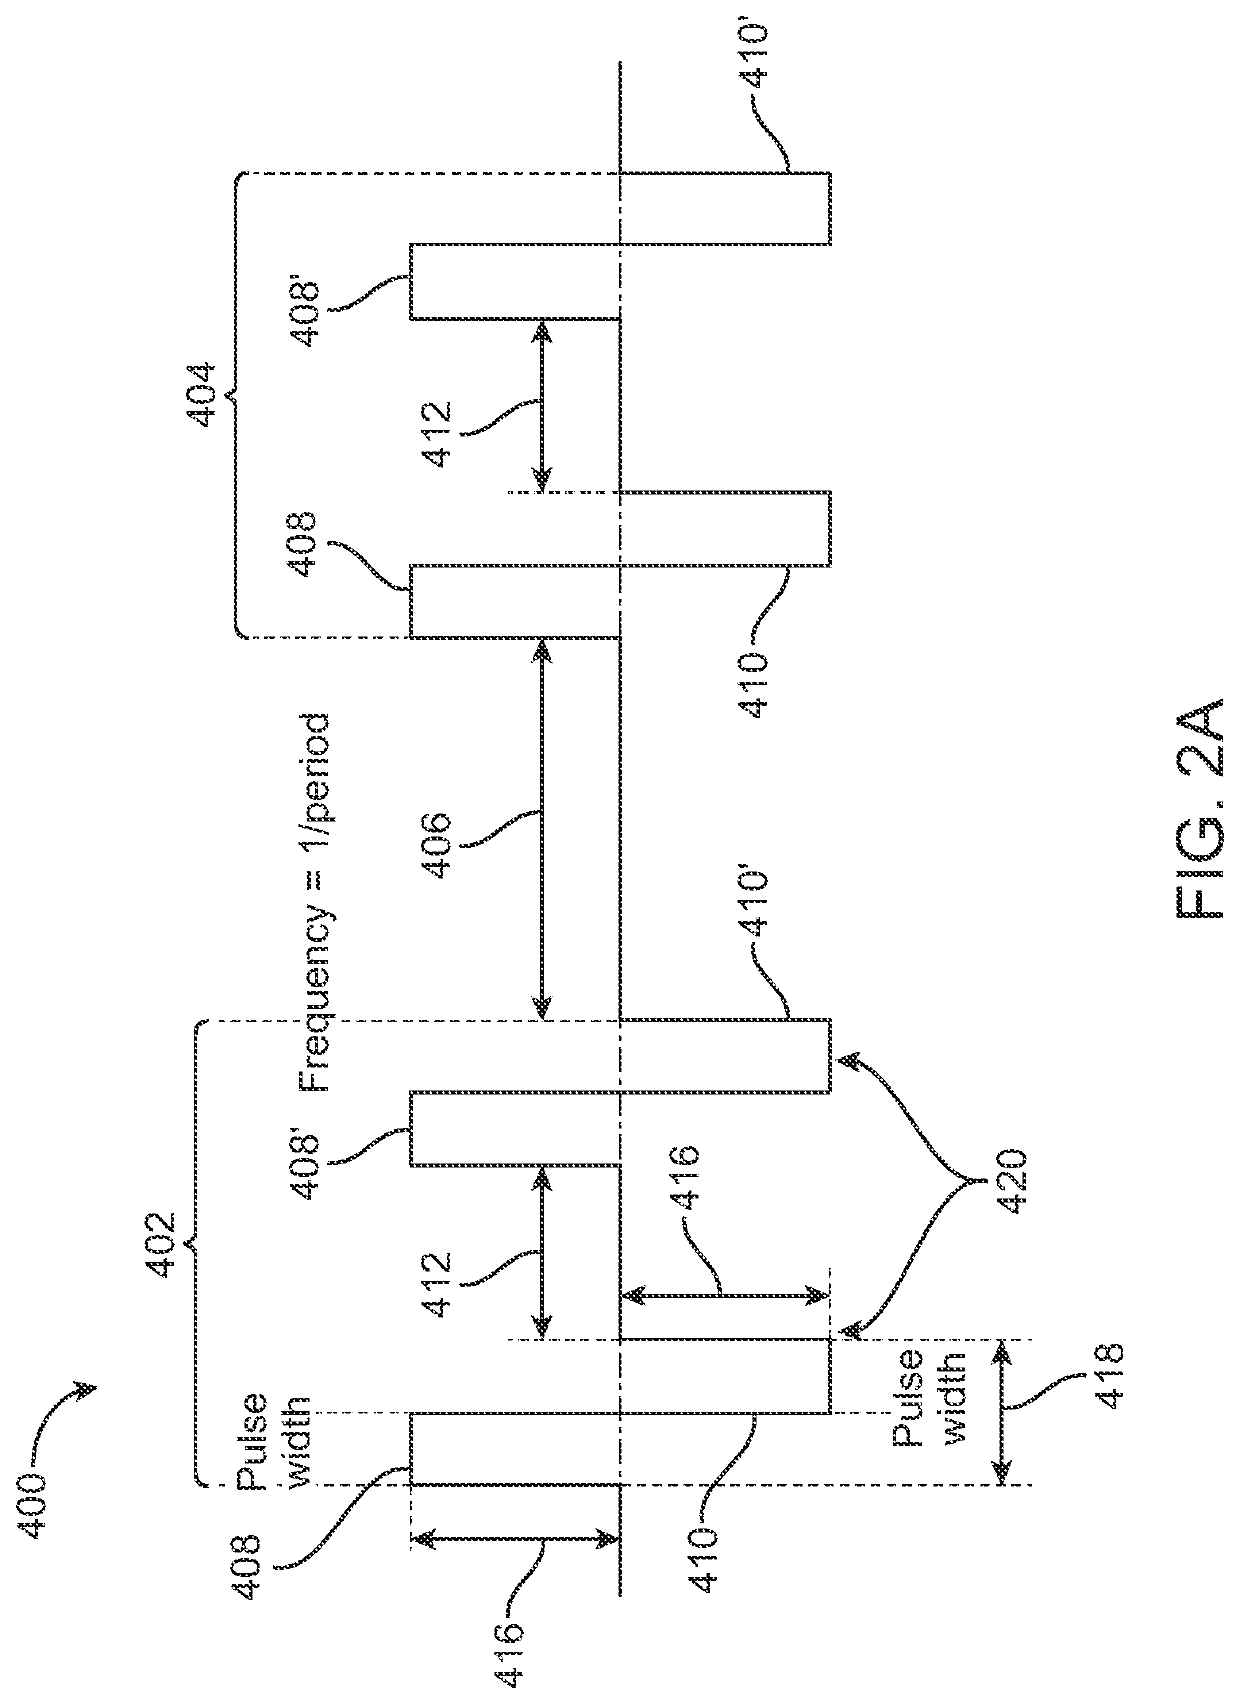 Devices, systems and methods for the treatment of abnormal tissue